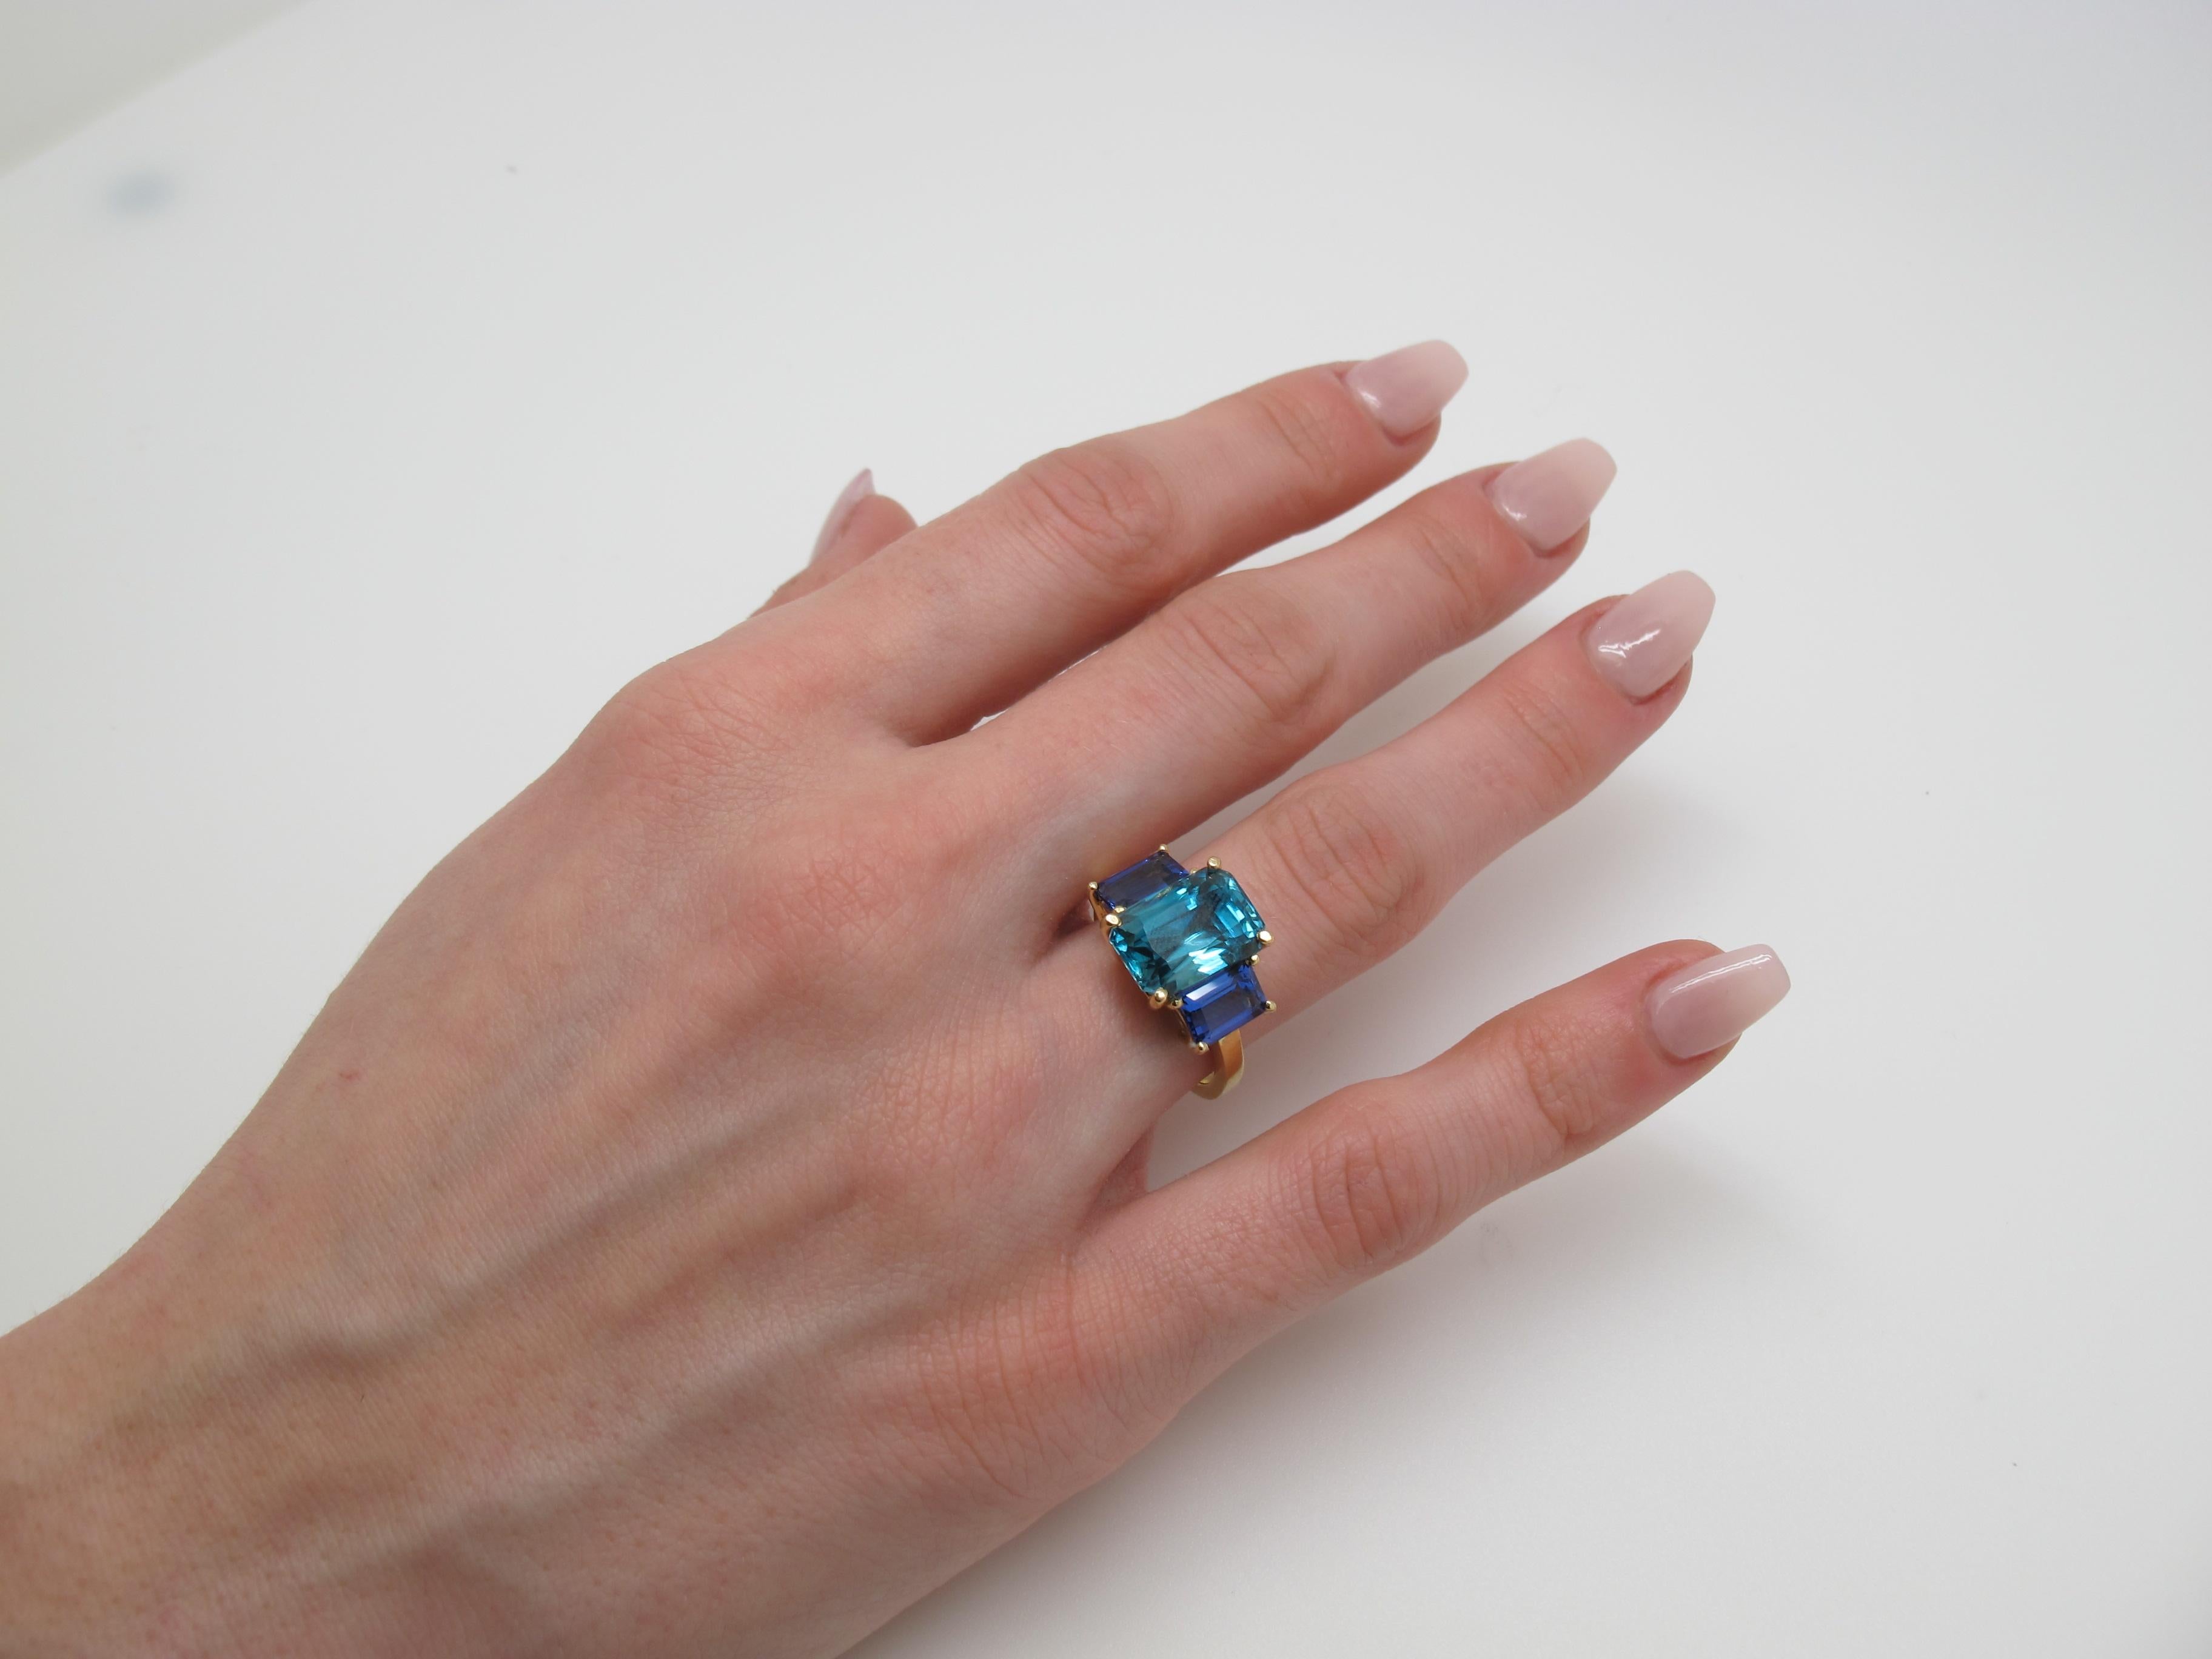 A modern twist on he classic 3-stone ring! Here, we pair a brilliant, natural Blue Zircon (11.45x8.16mm/7.65cts) with Tanzanites (7x5mm/2.20cts tw) to form a beautiful color pairing.

Handmade by our jewelers in Los Angeles.